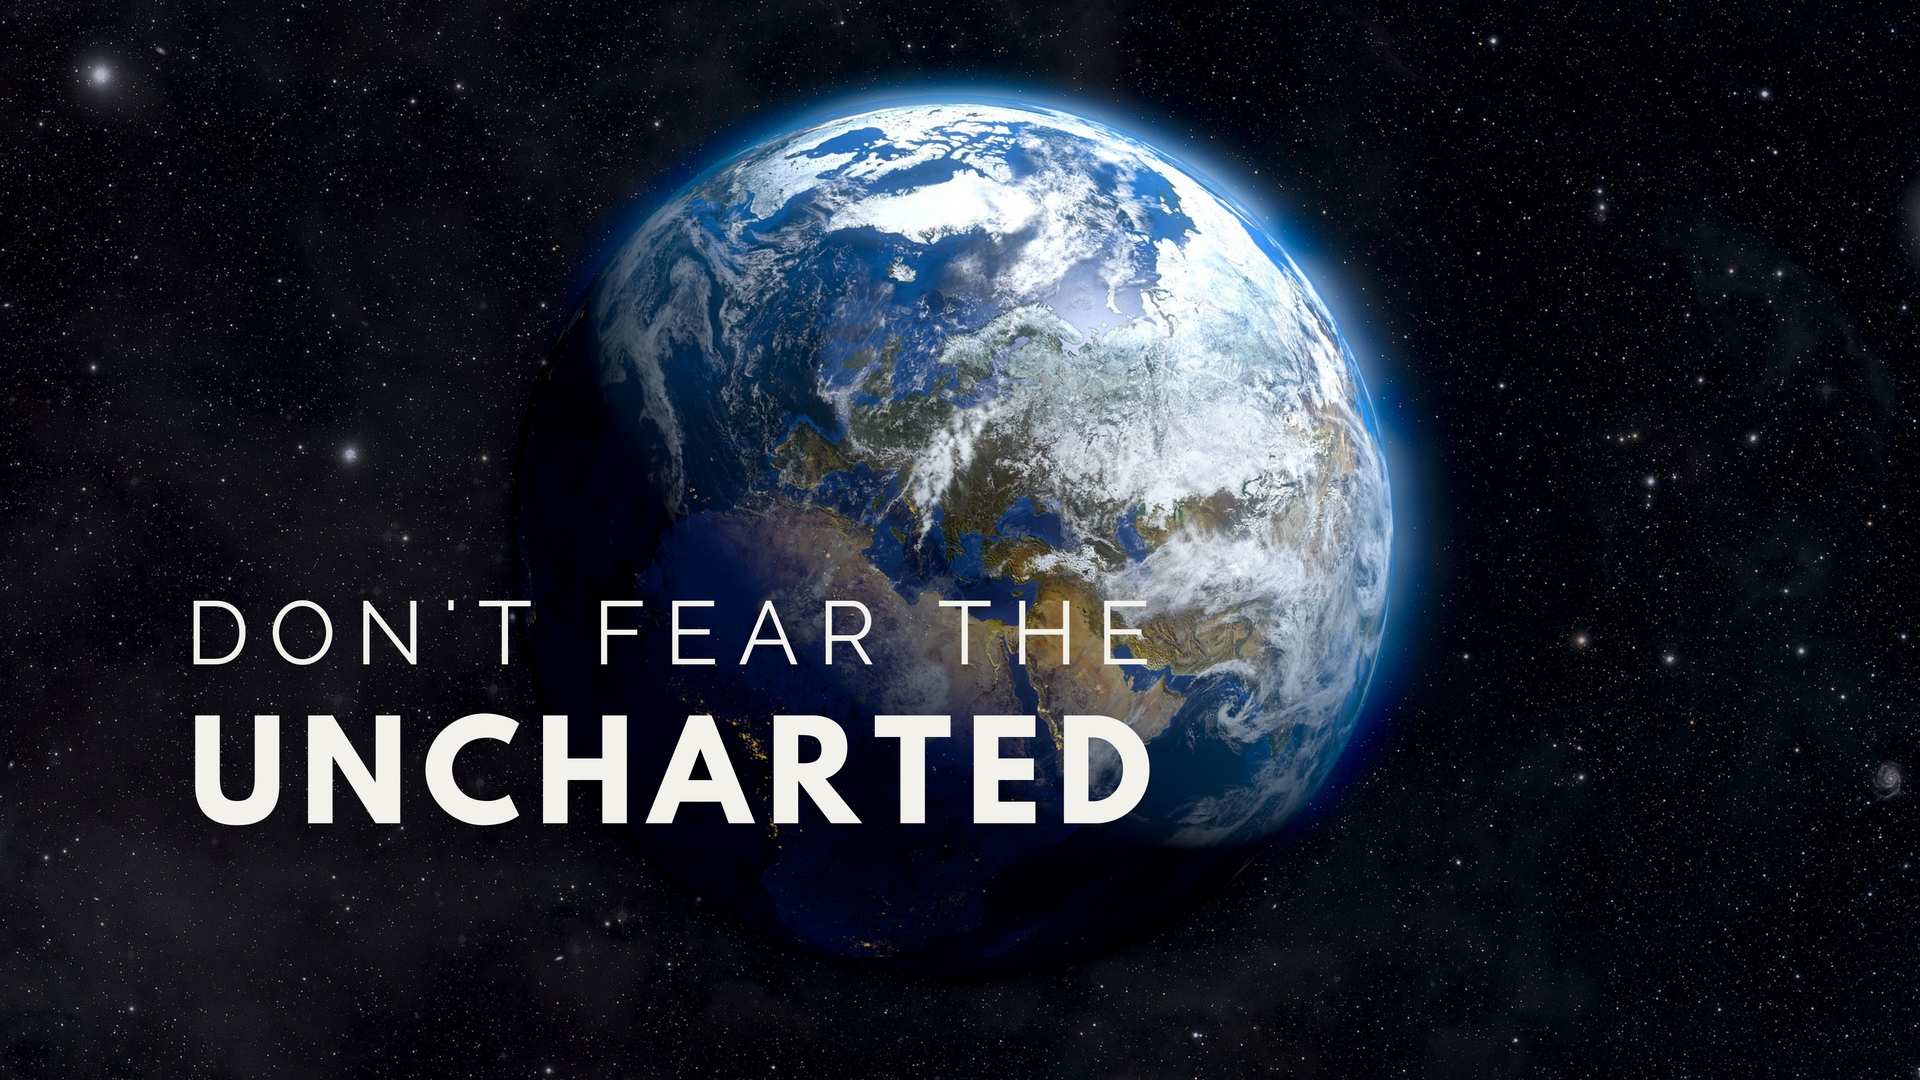 Don't Fear the Uncharted (Earth in space)